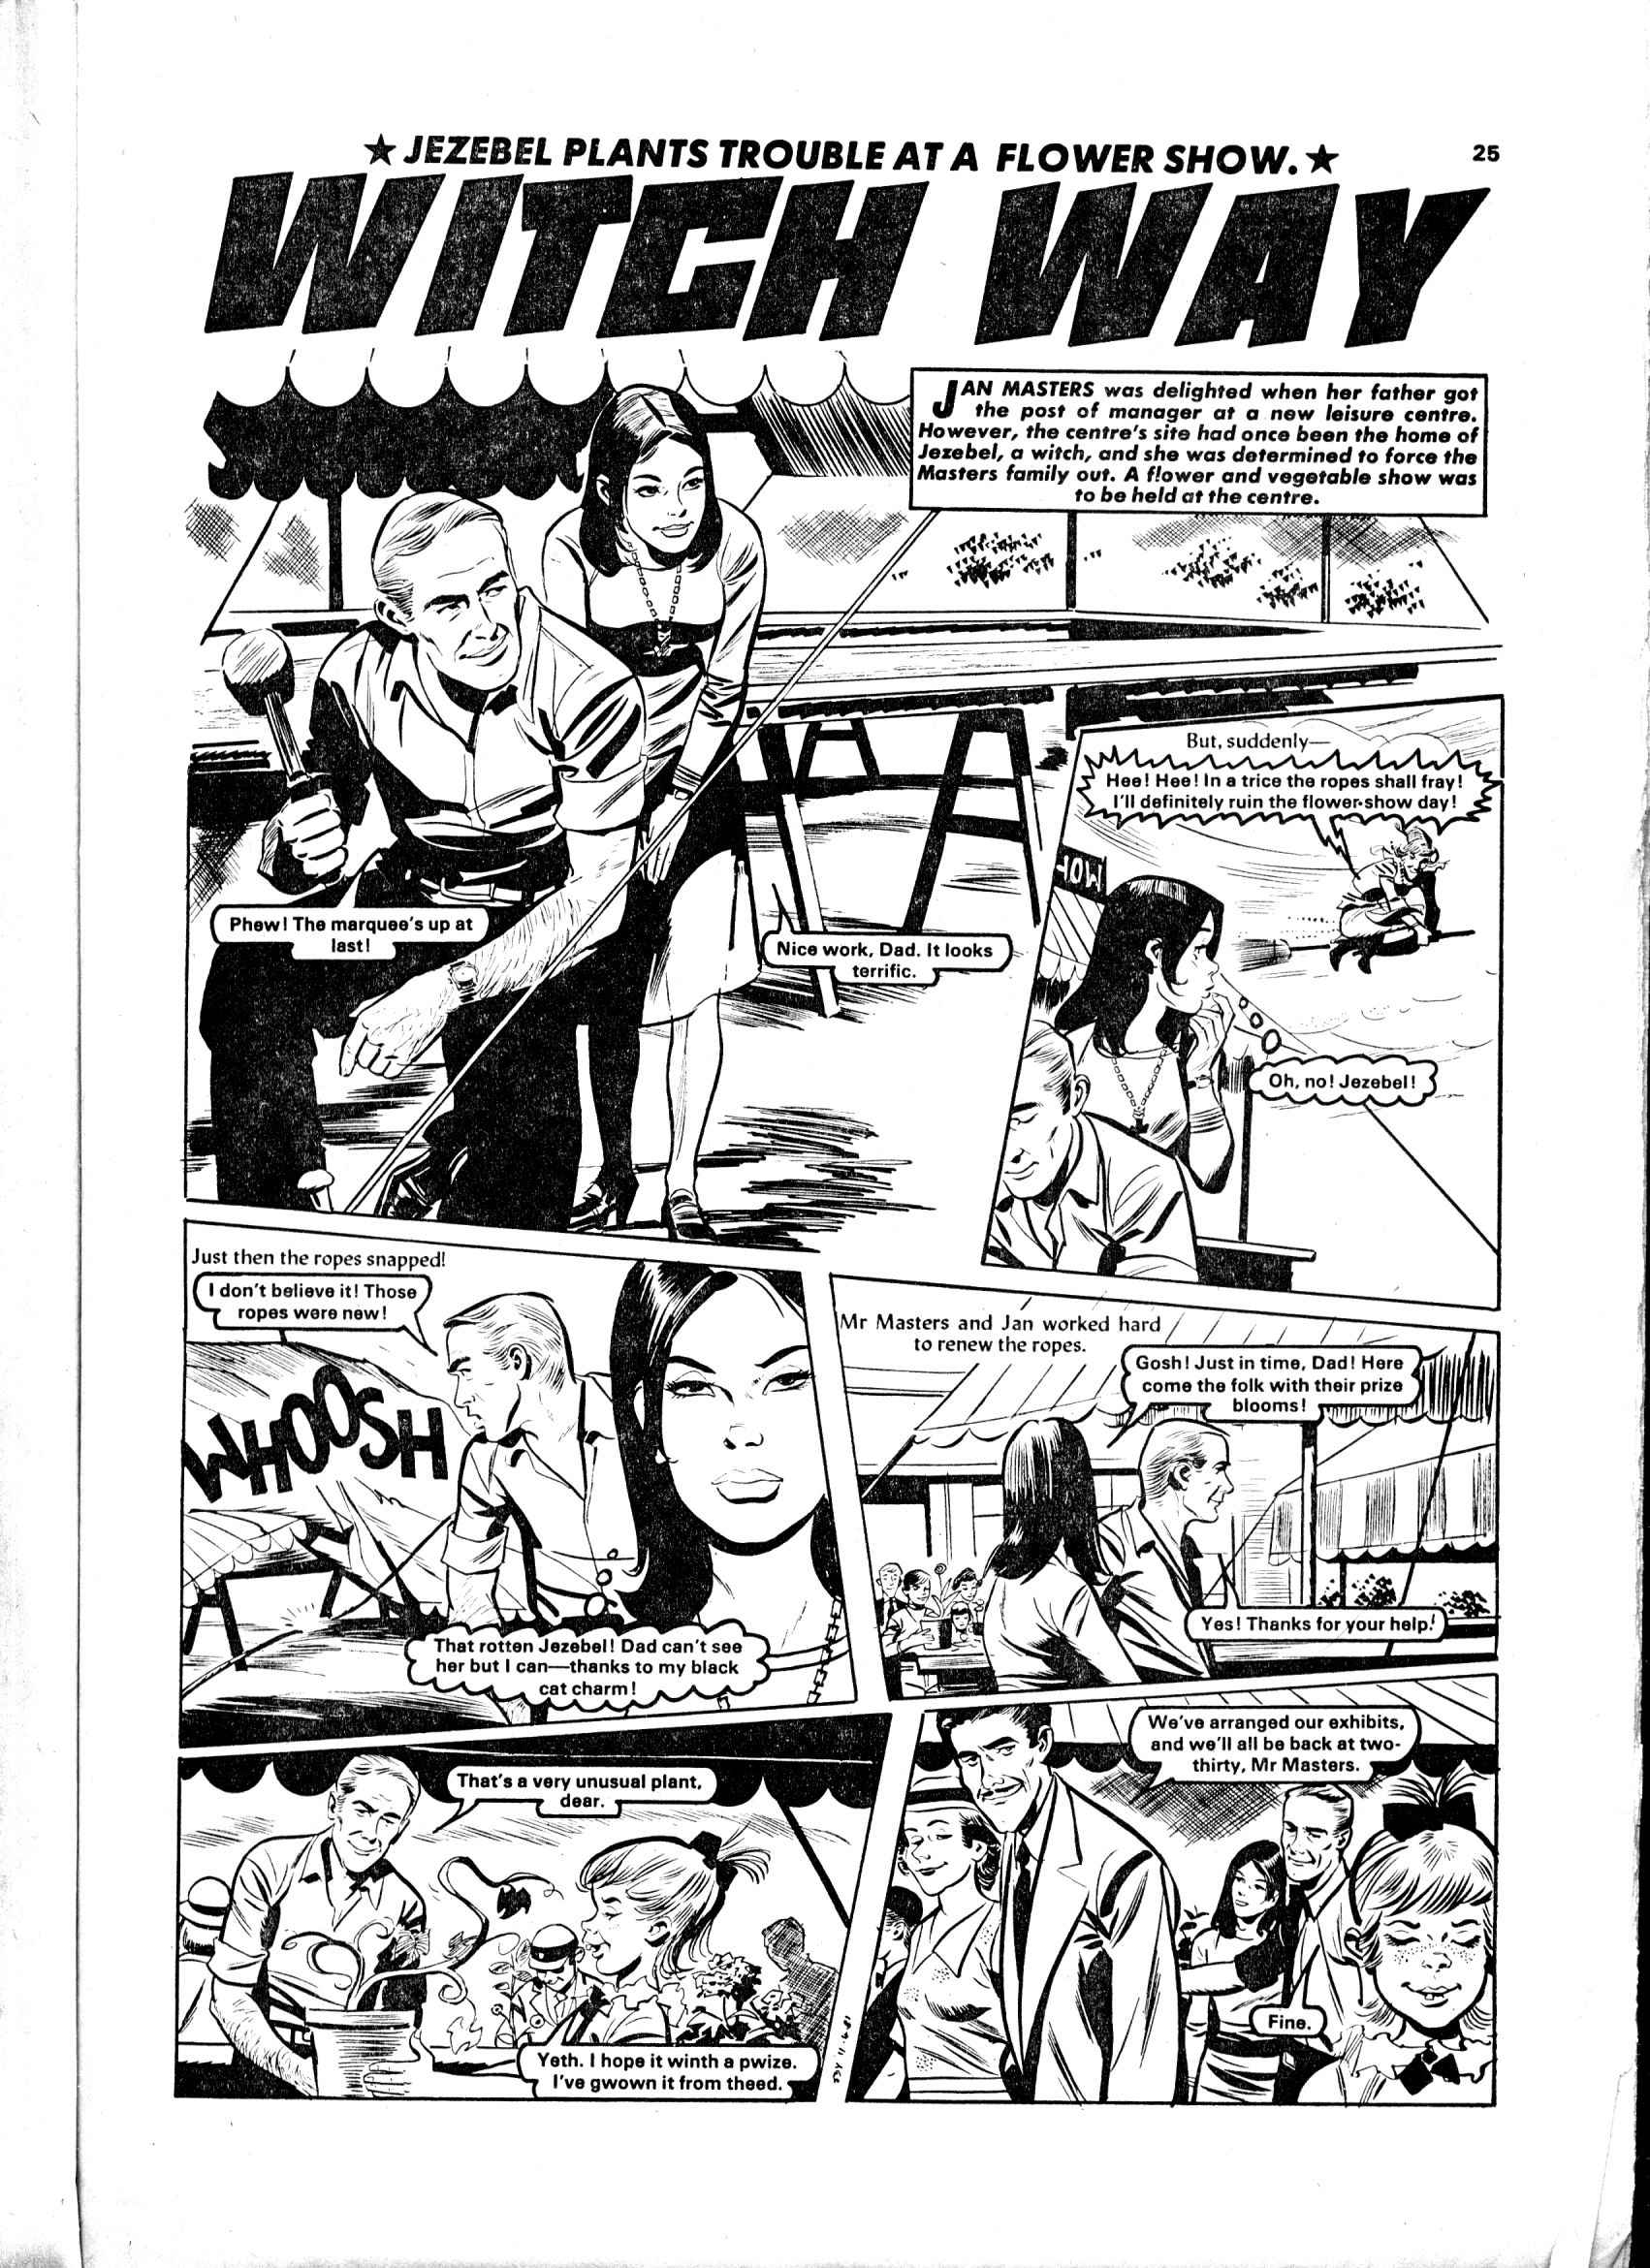 Read online Judy comic -  Issue #1109 - 25